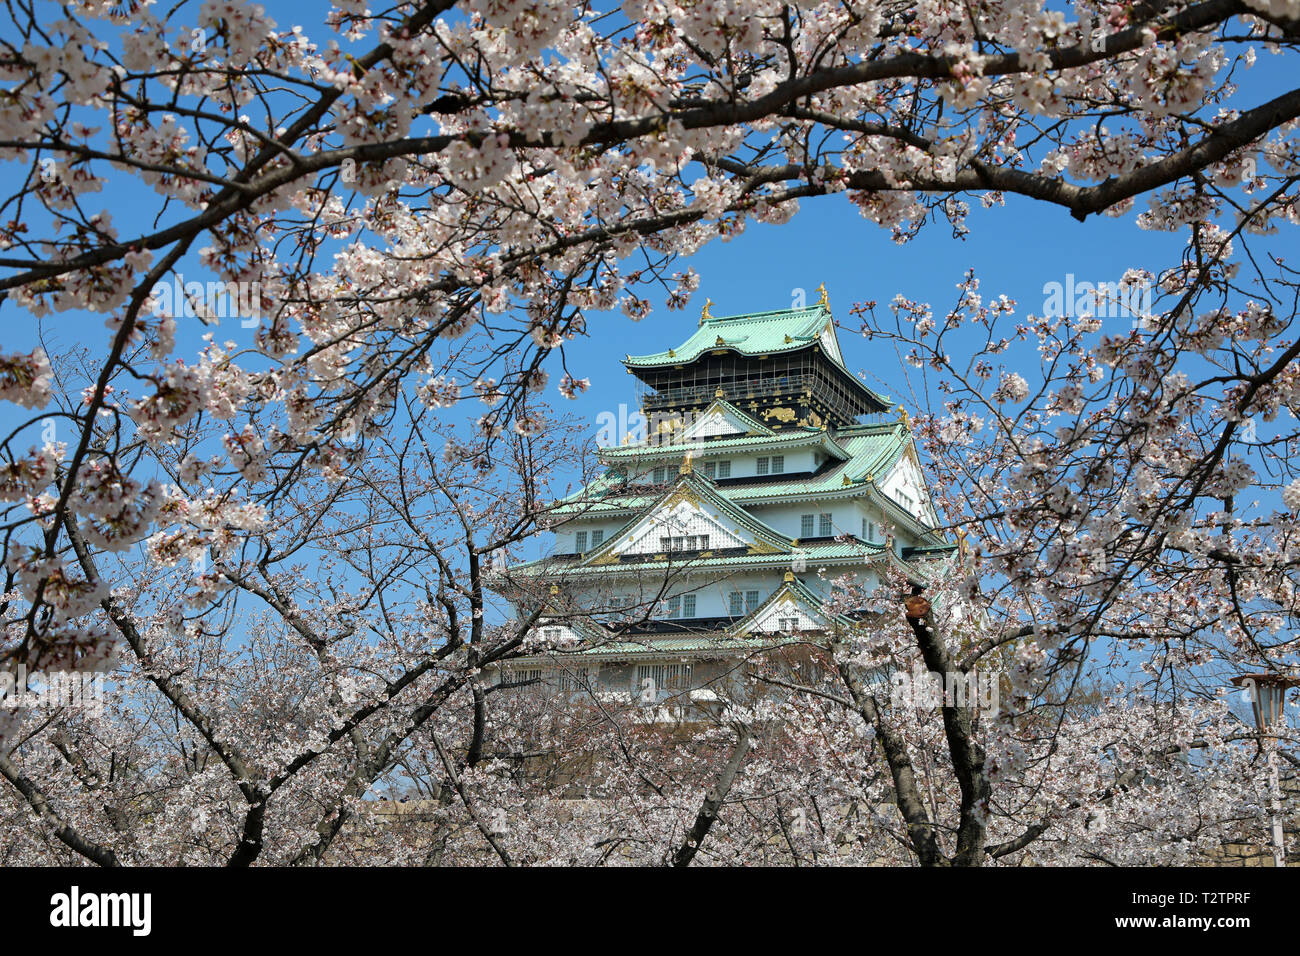 Osaka, Japan. 4th Apr, 2019. Osaka Castle seen through the branches of flowering cherry trees during Cherry Blossom season, Osaka, Japan Credit: Paul Brown/Alamy Live News Stock Photo